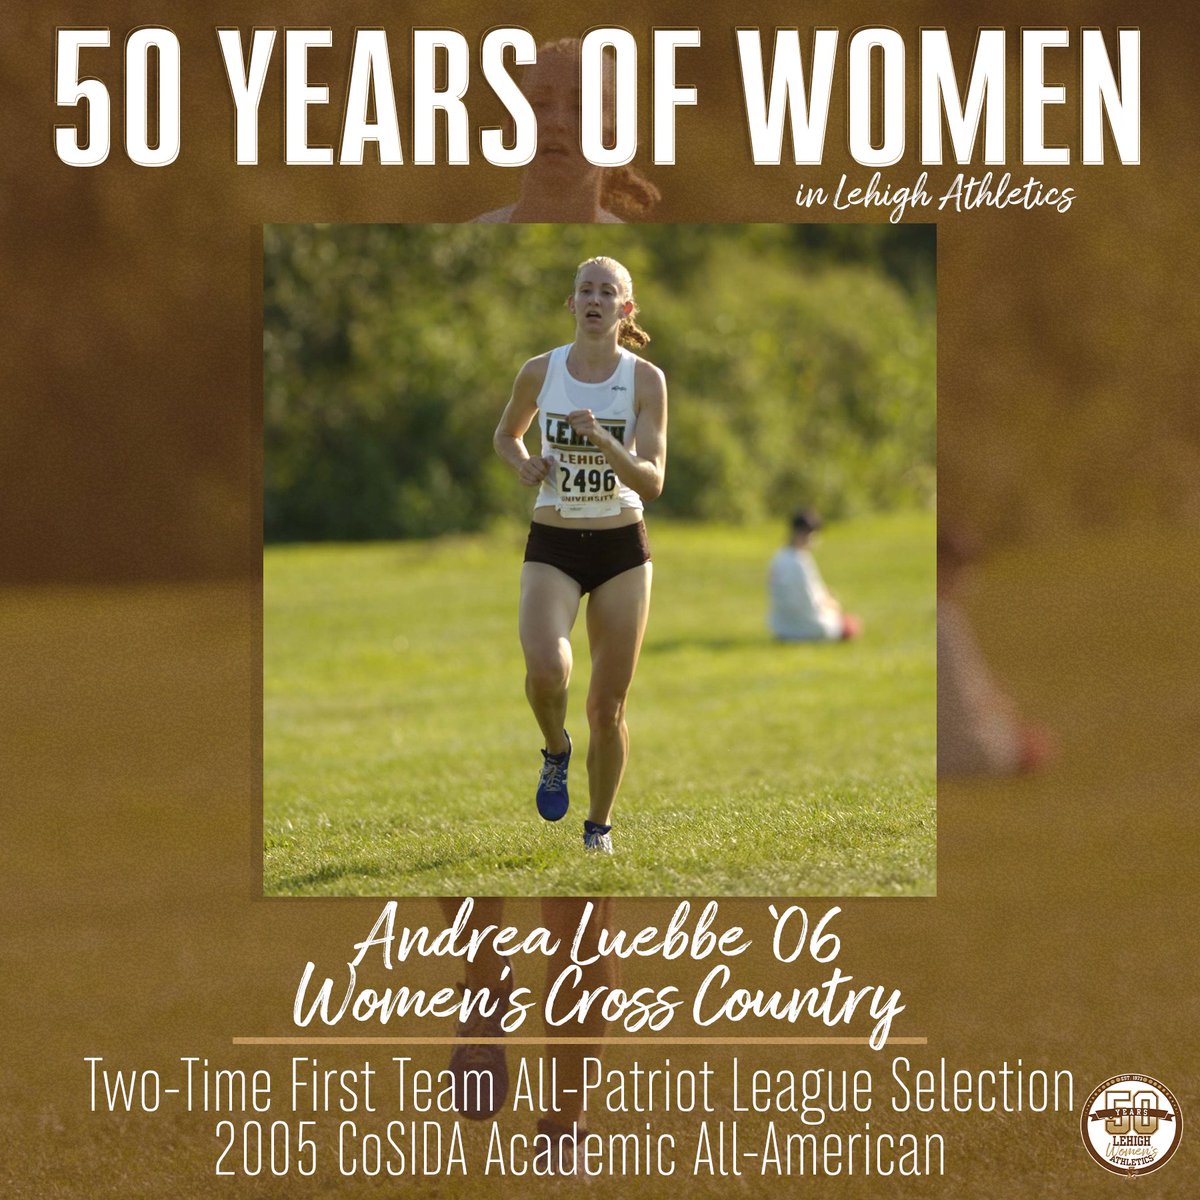 As we continue to celebrate 50 Years of Lehigh Women's Athletics, we'd like to recognize some of our impactful @LehighTFXC alumnae including Jennifer Markham '16 who was the 2013 @PatriotLeague Scholar-Athlete of the Year.
#GoLehigh | #FeatureFriday